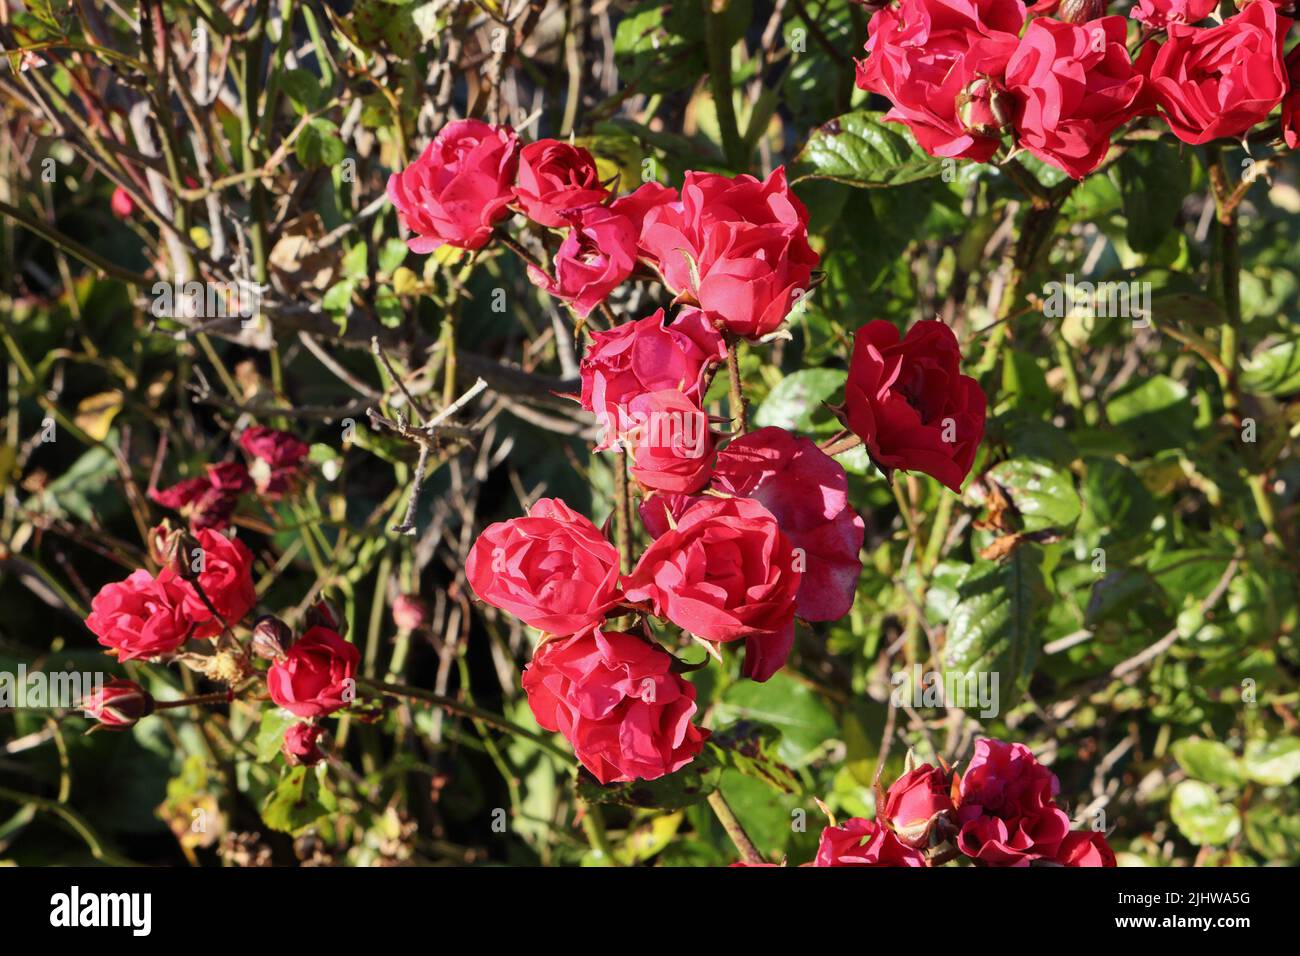 Red roses bush in bloom, growing wild in cemetery Stock Photo